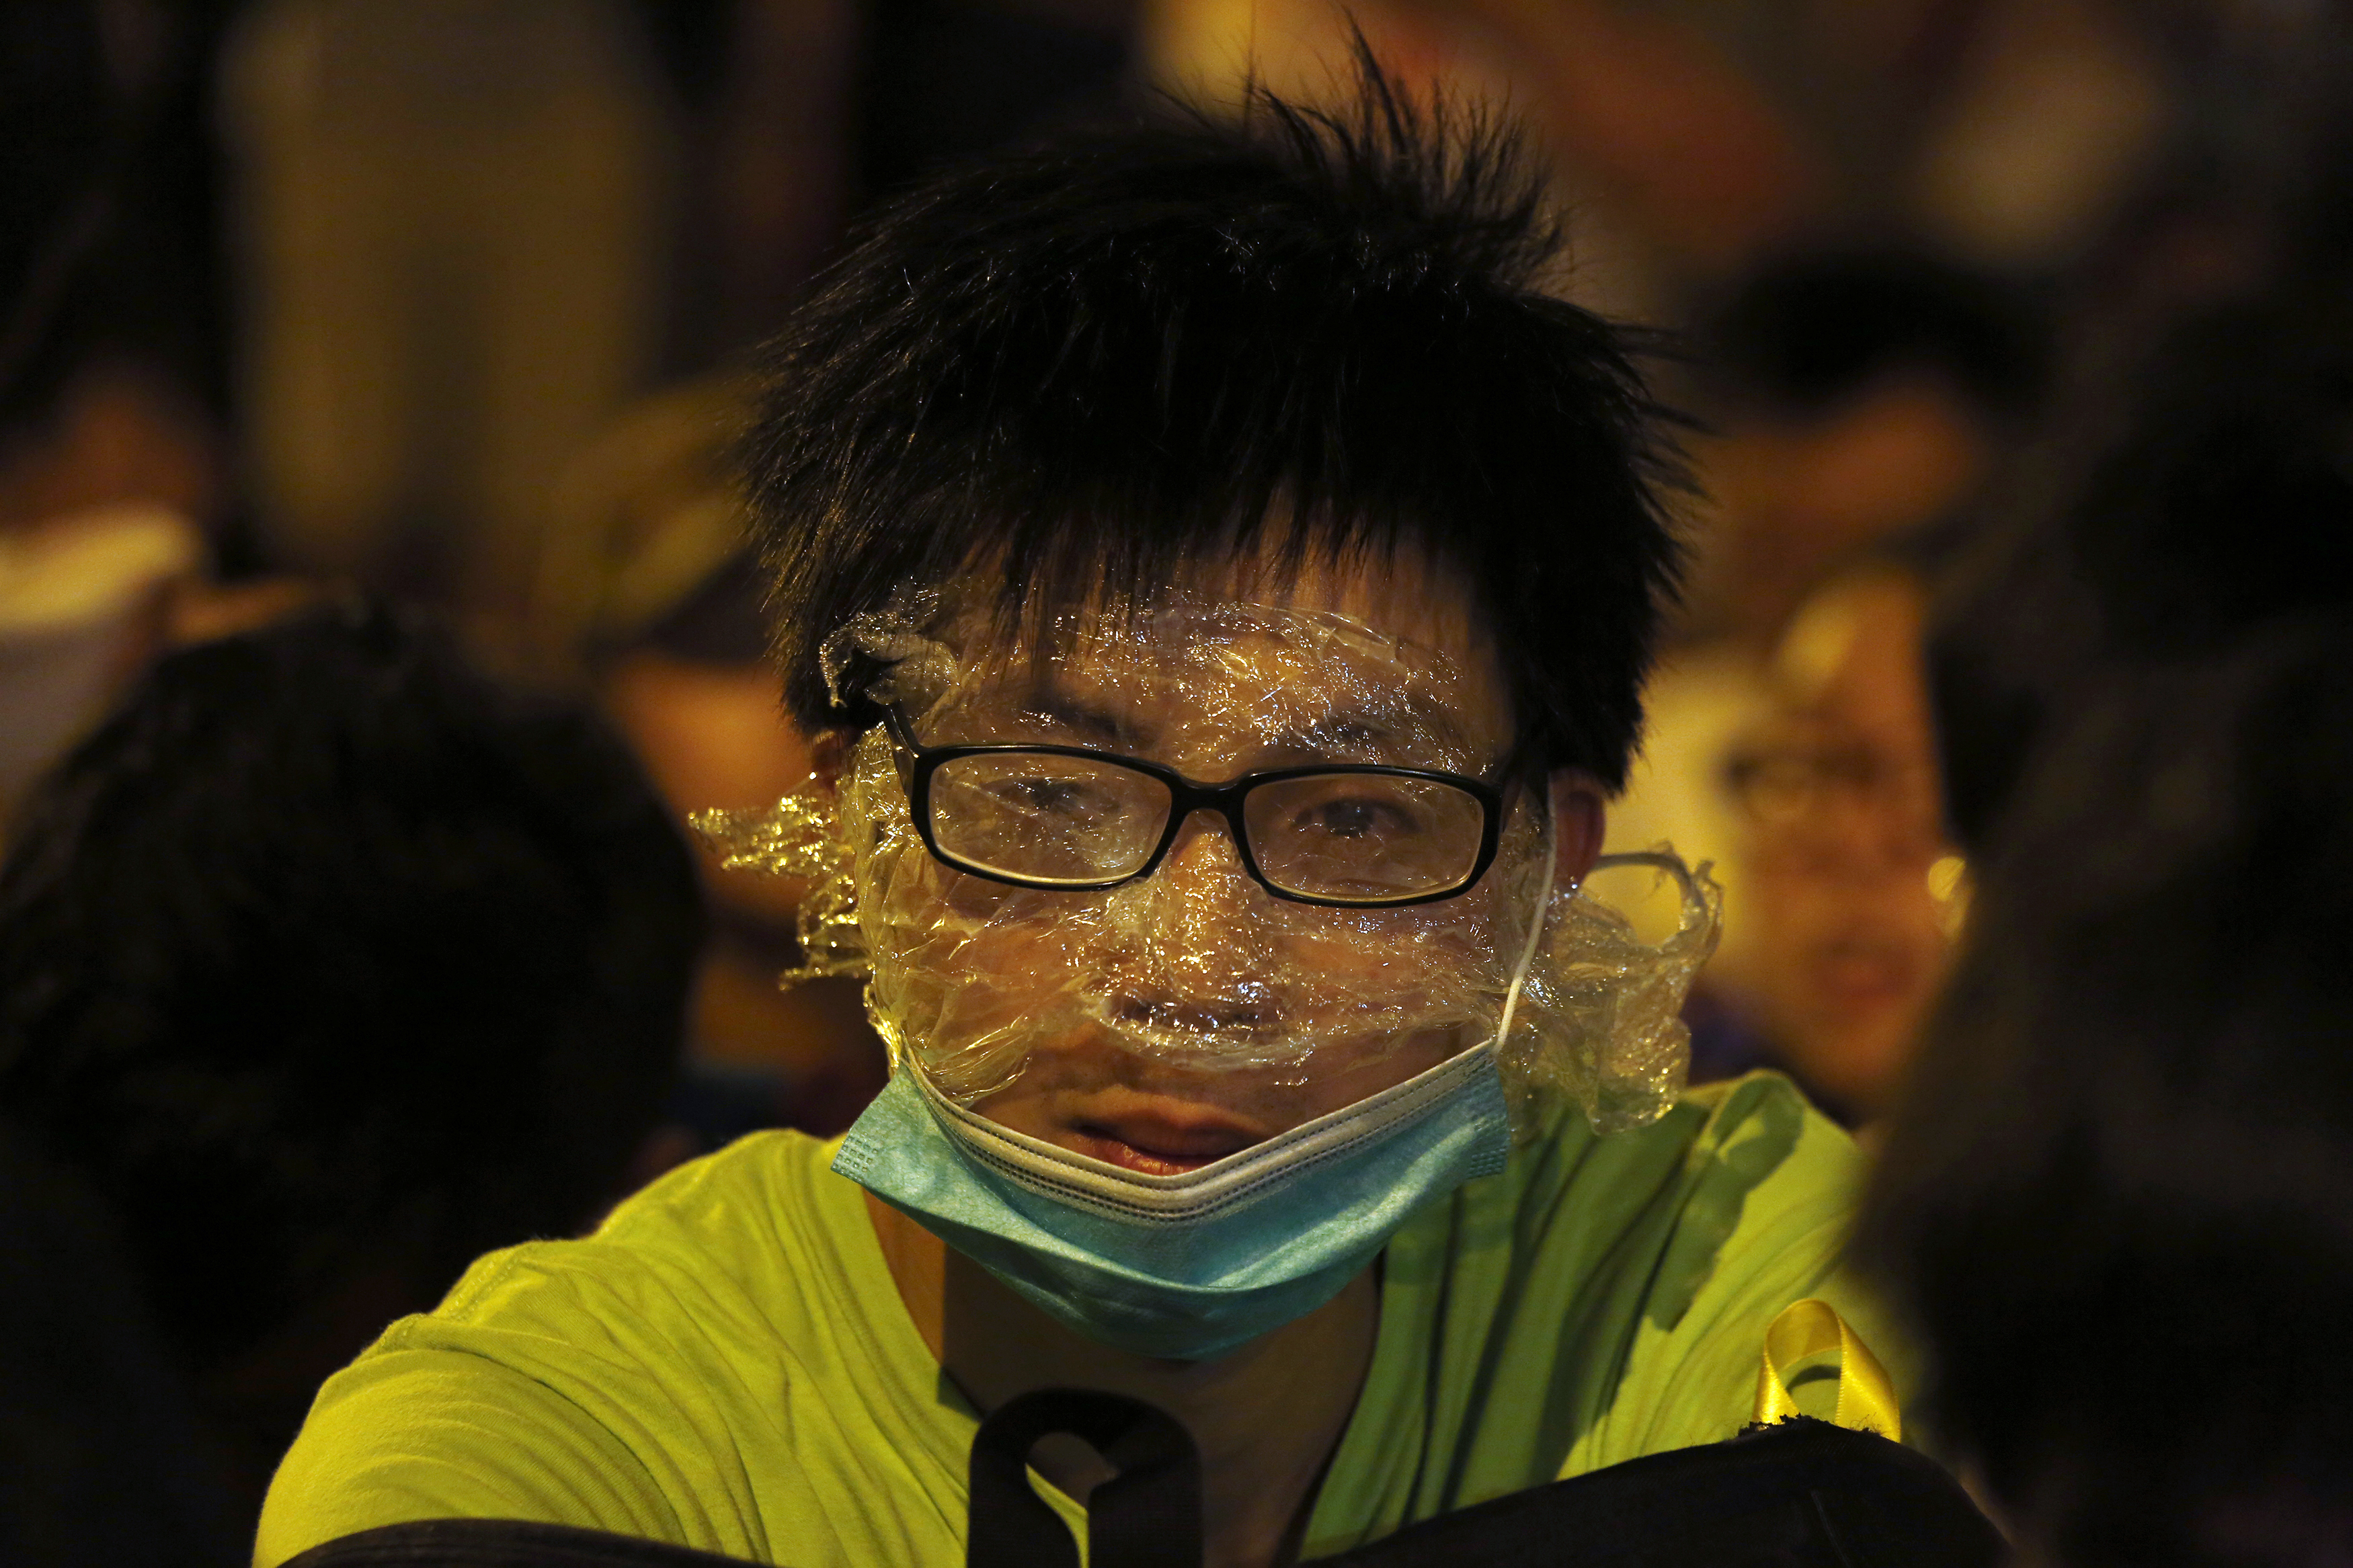 A protester wearing rudimentary protection against pepper spray is pictured in Hong Kong